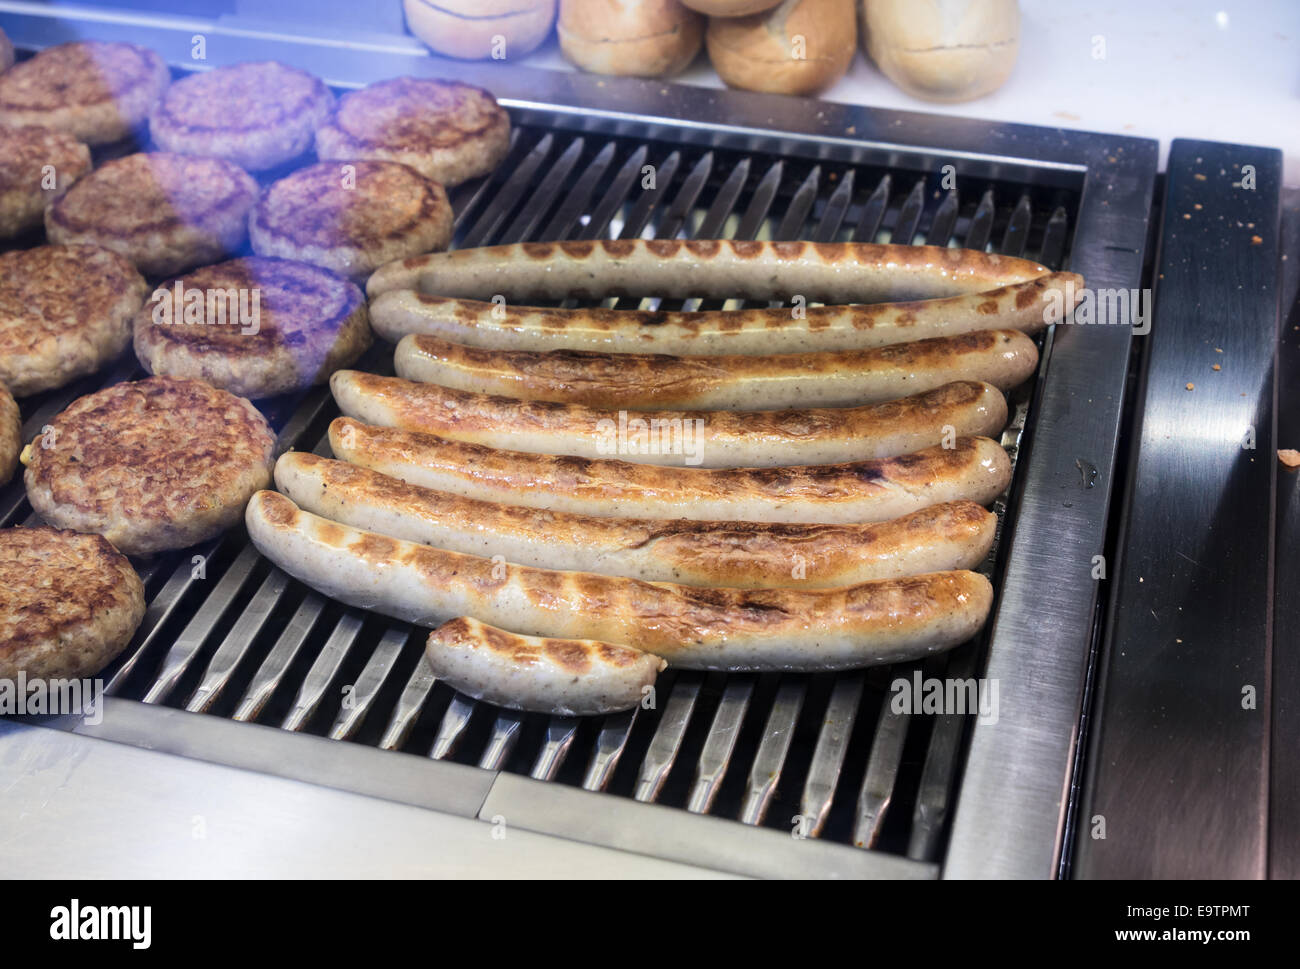 Currywurst and burger patties being cooked, prepared foods counter, Germany Stock Photo